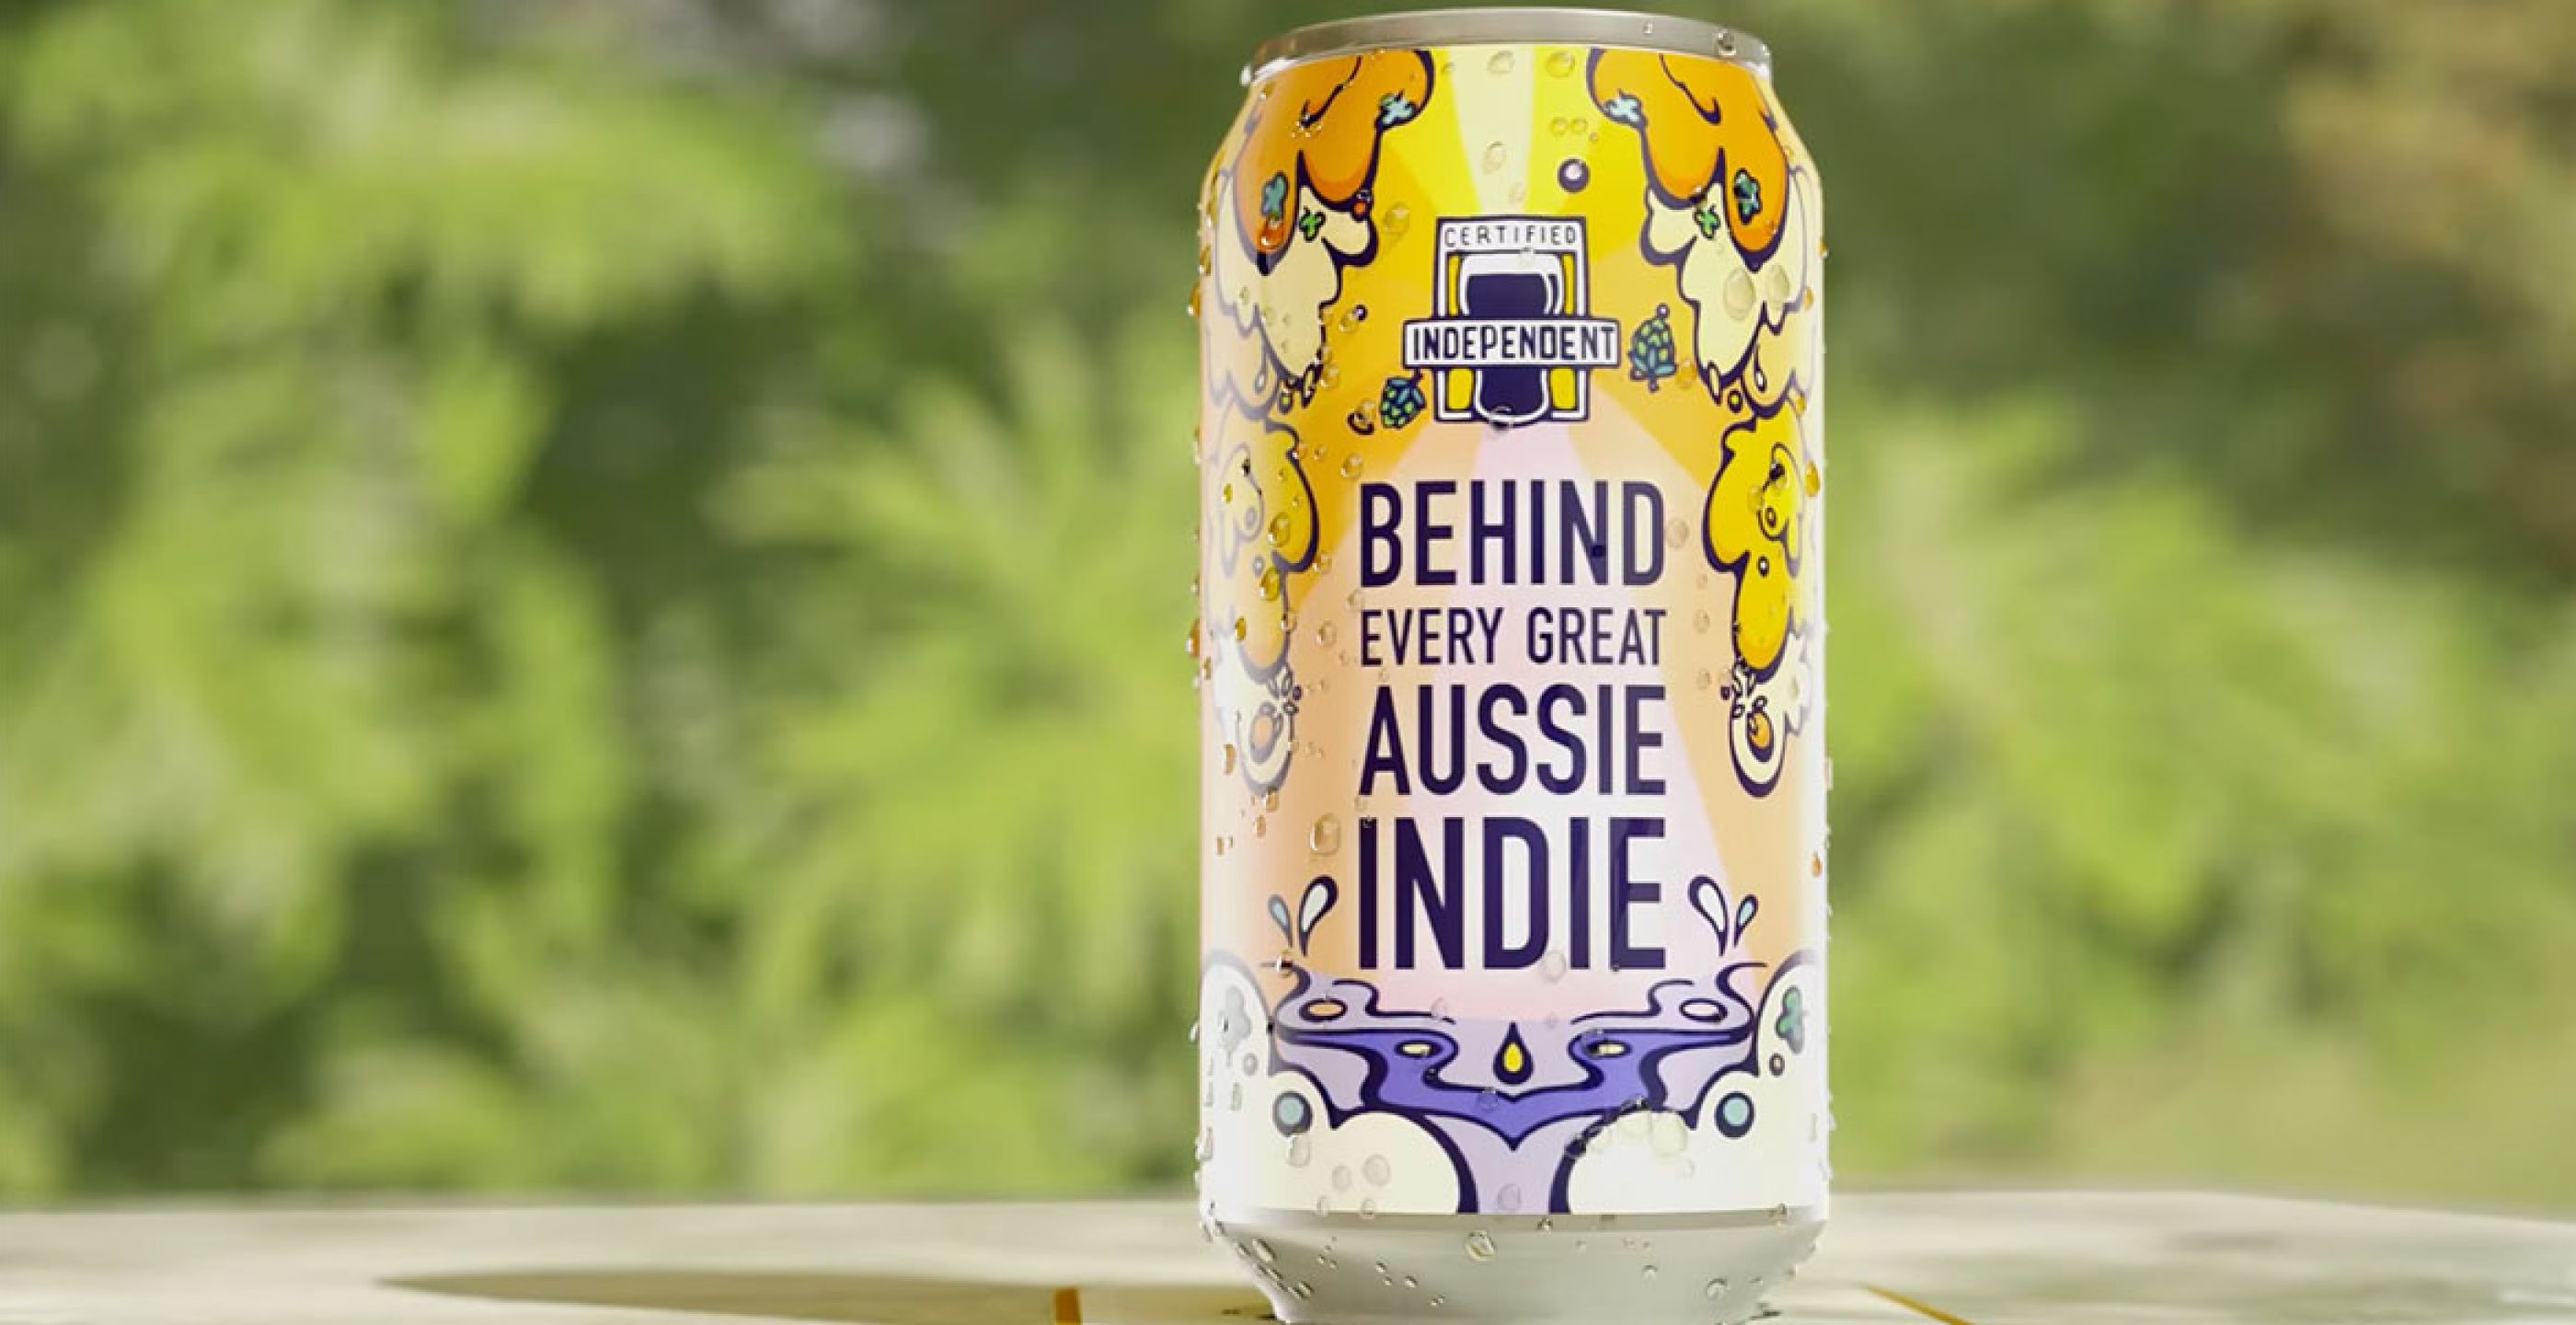 The IBA Put The Spotlight On Finding Indie Beer